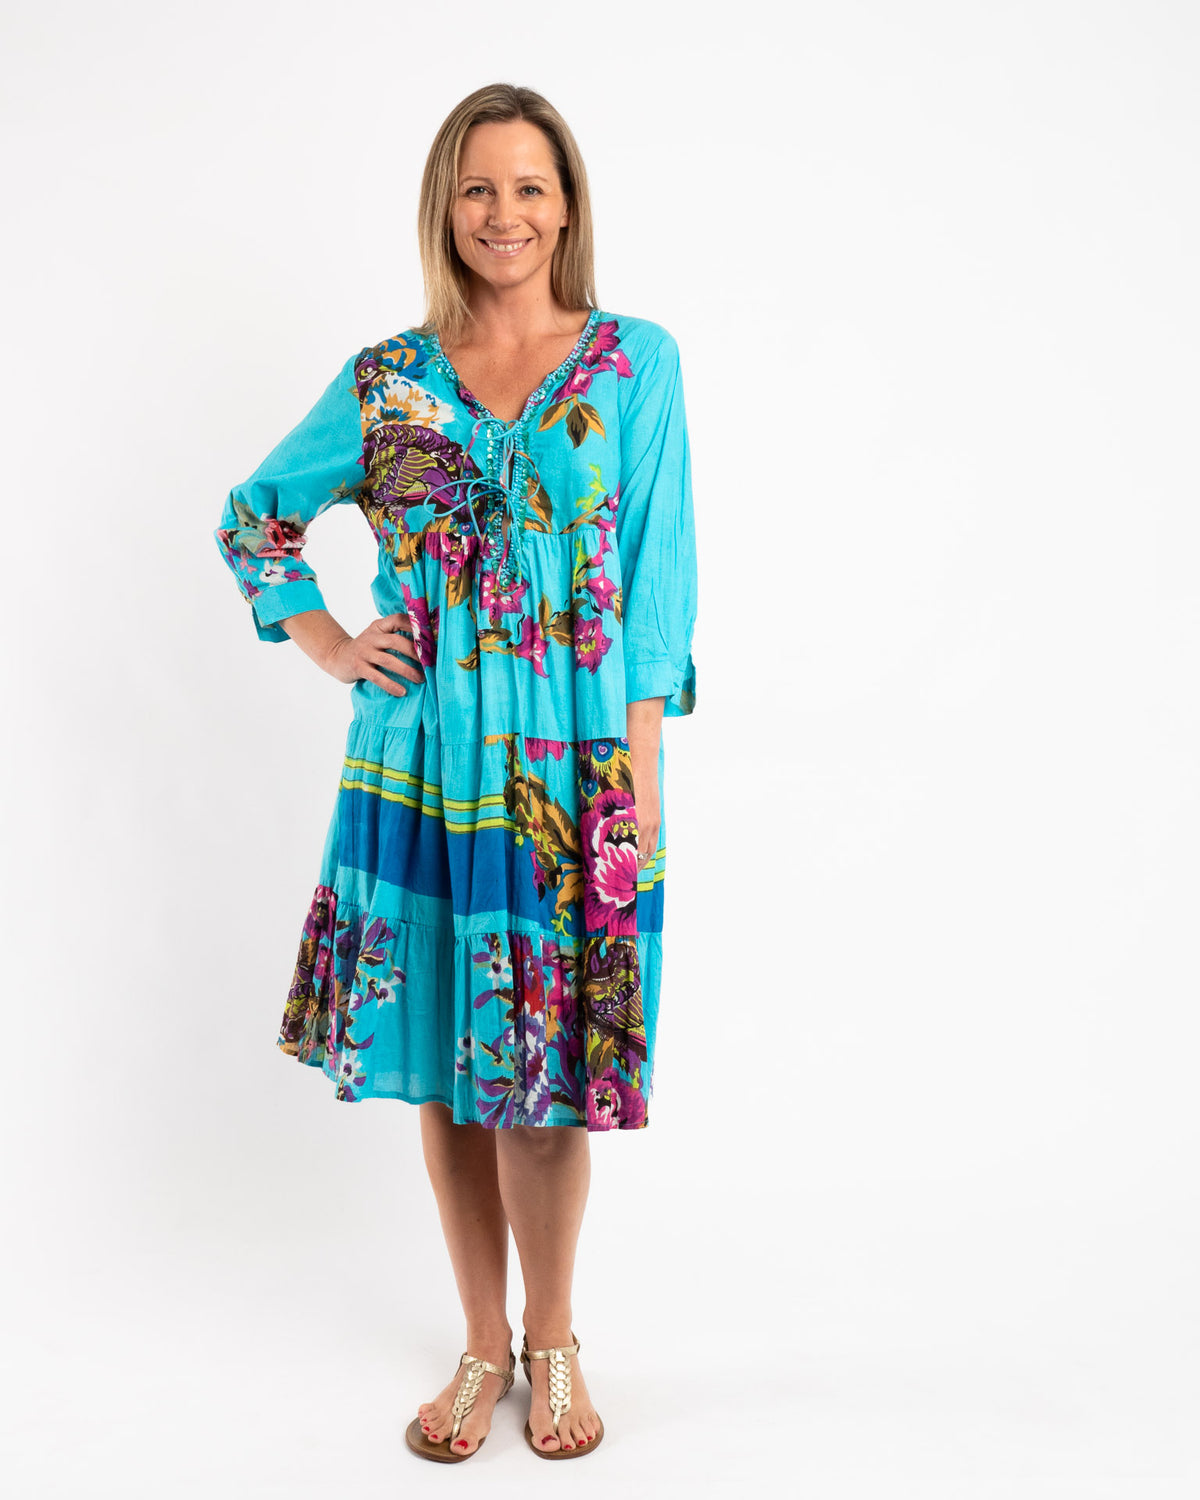 Gypsy Style Panel Dress in Sky Blue Floral